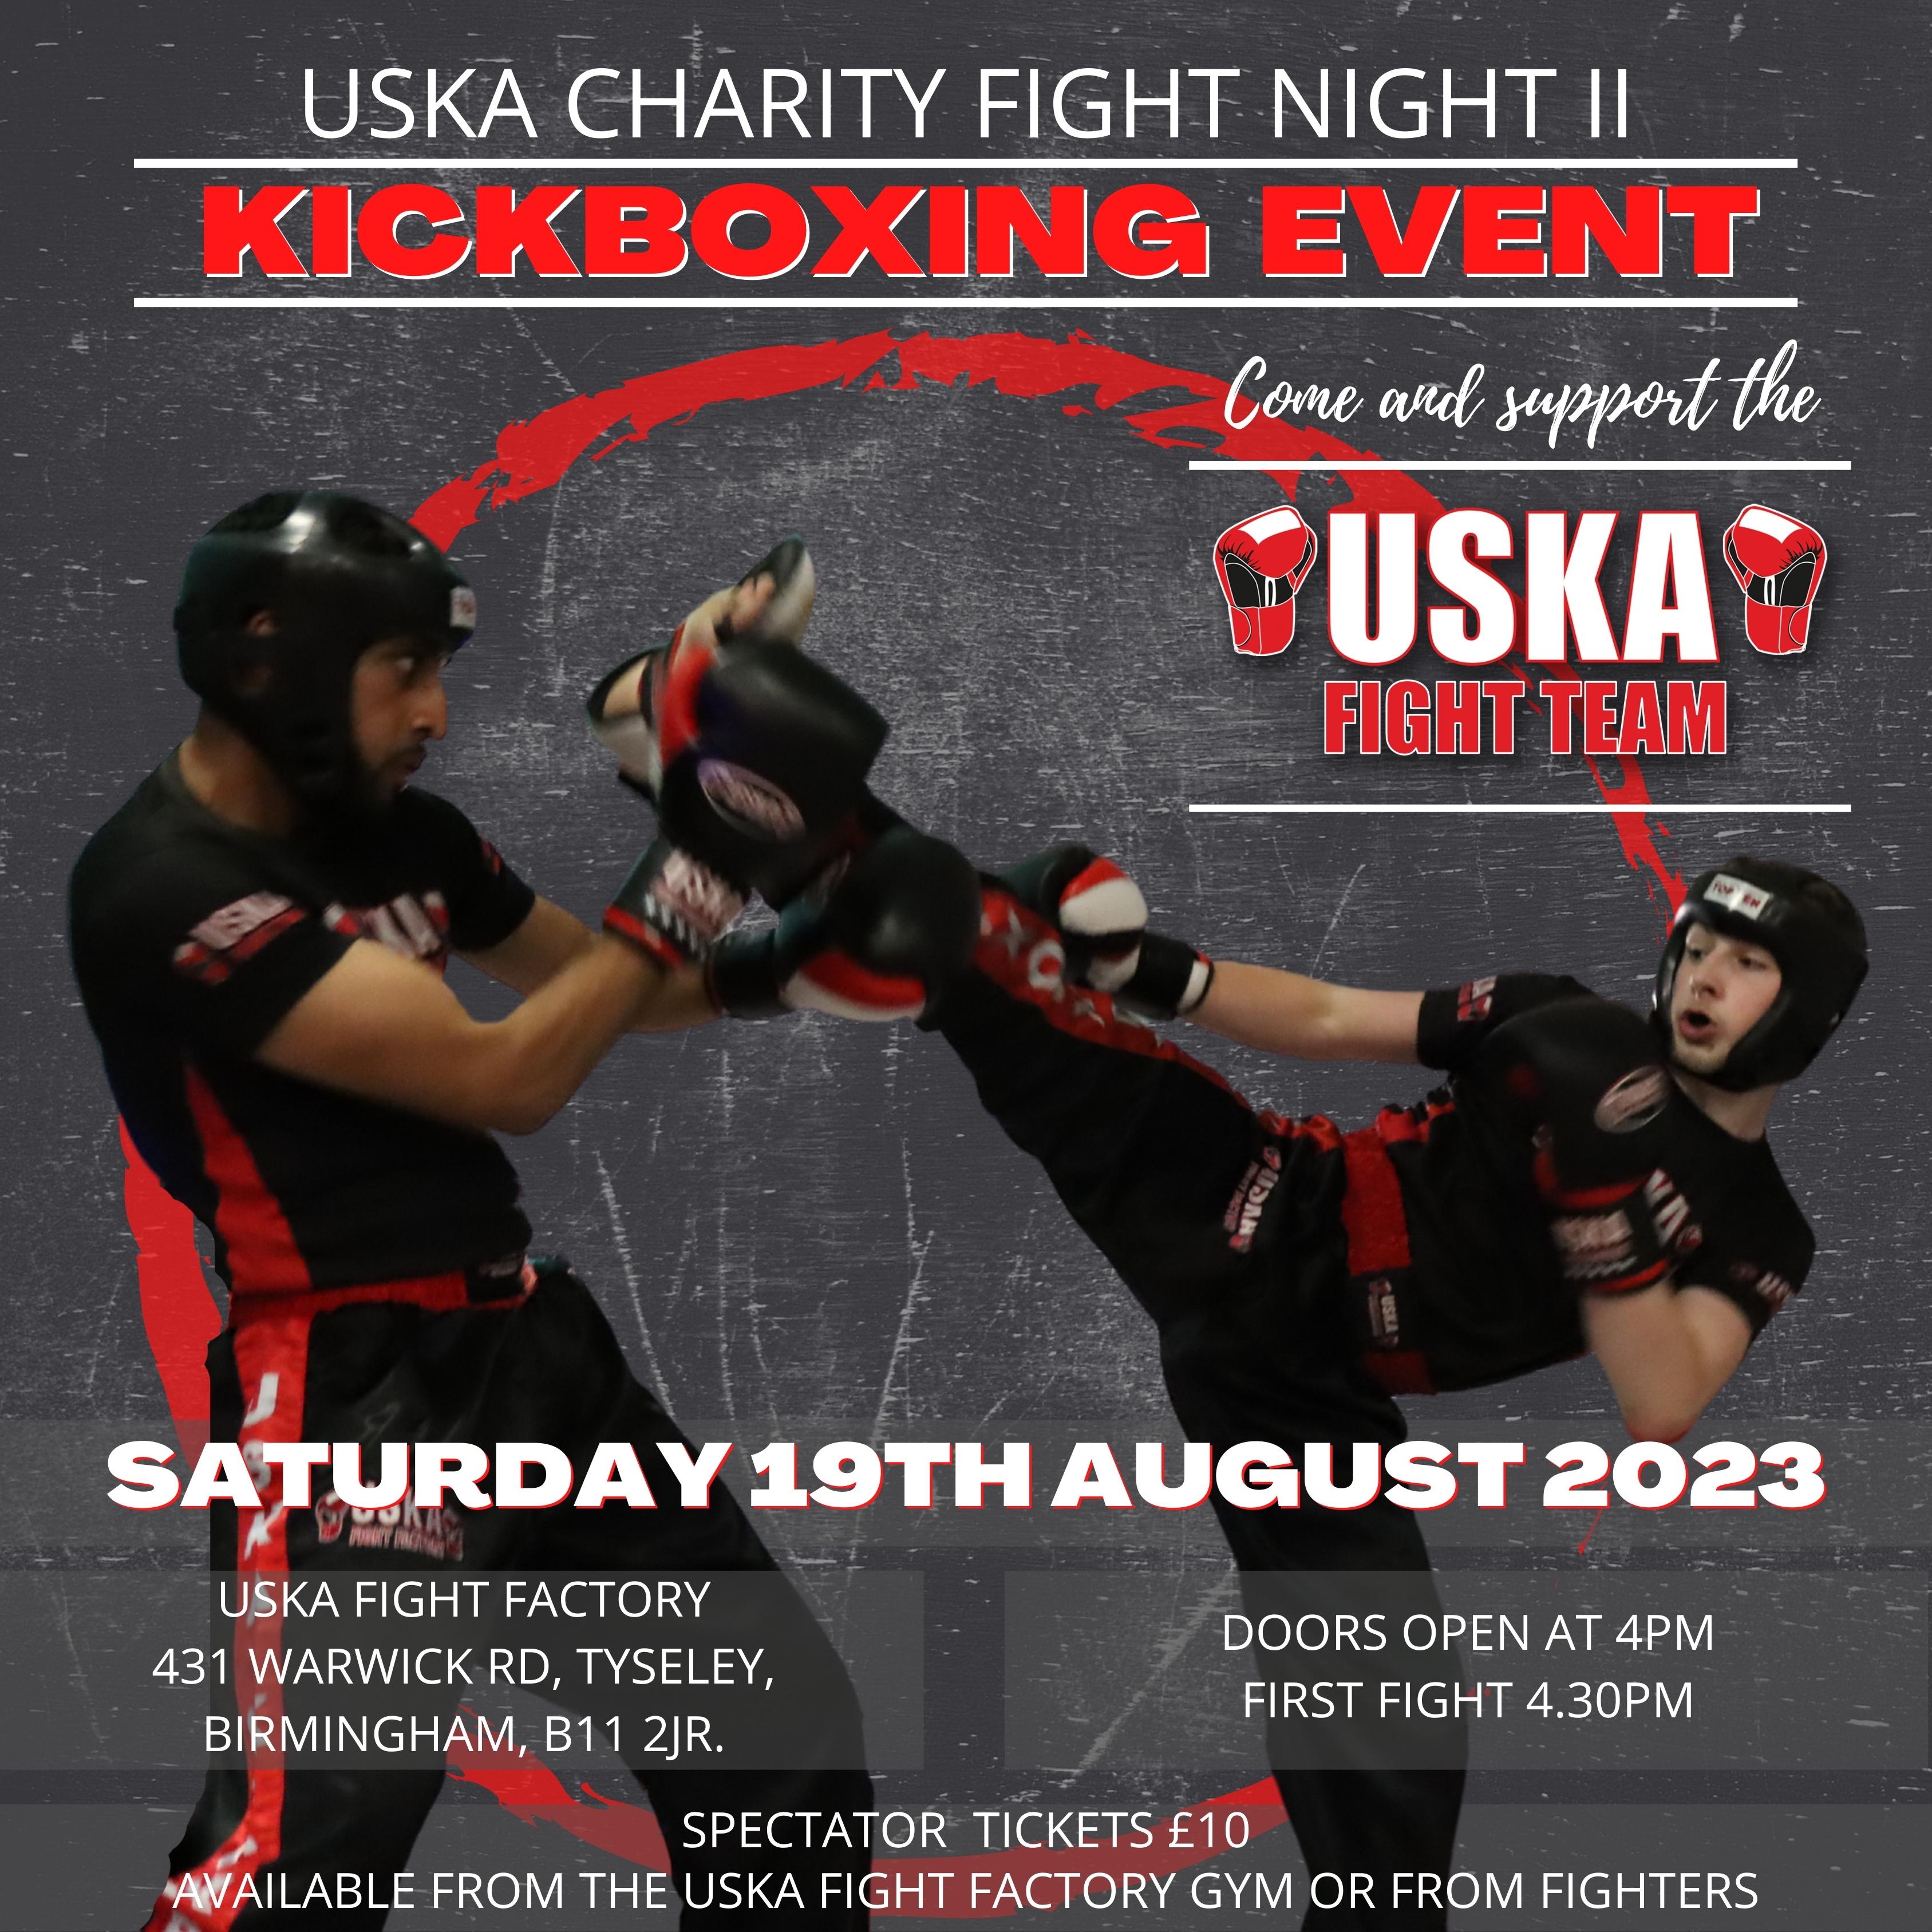 27-07-23 - Check out our USKA Charity Fight Night II Line Up!